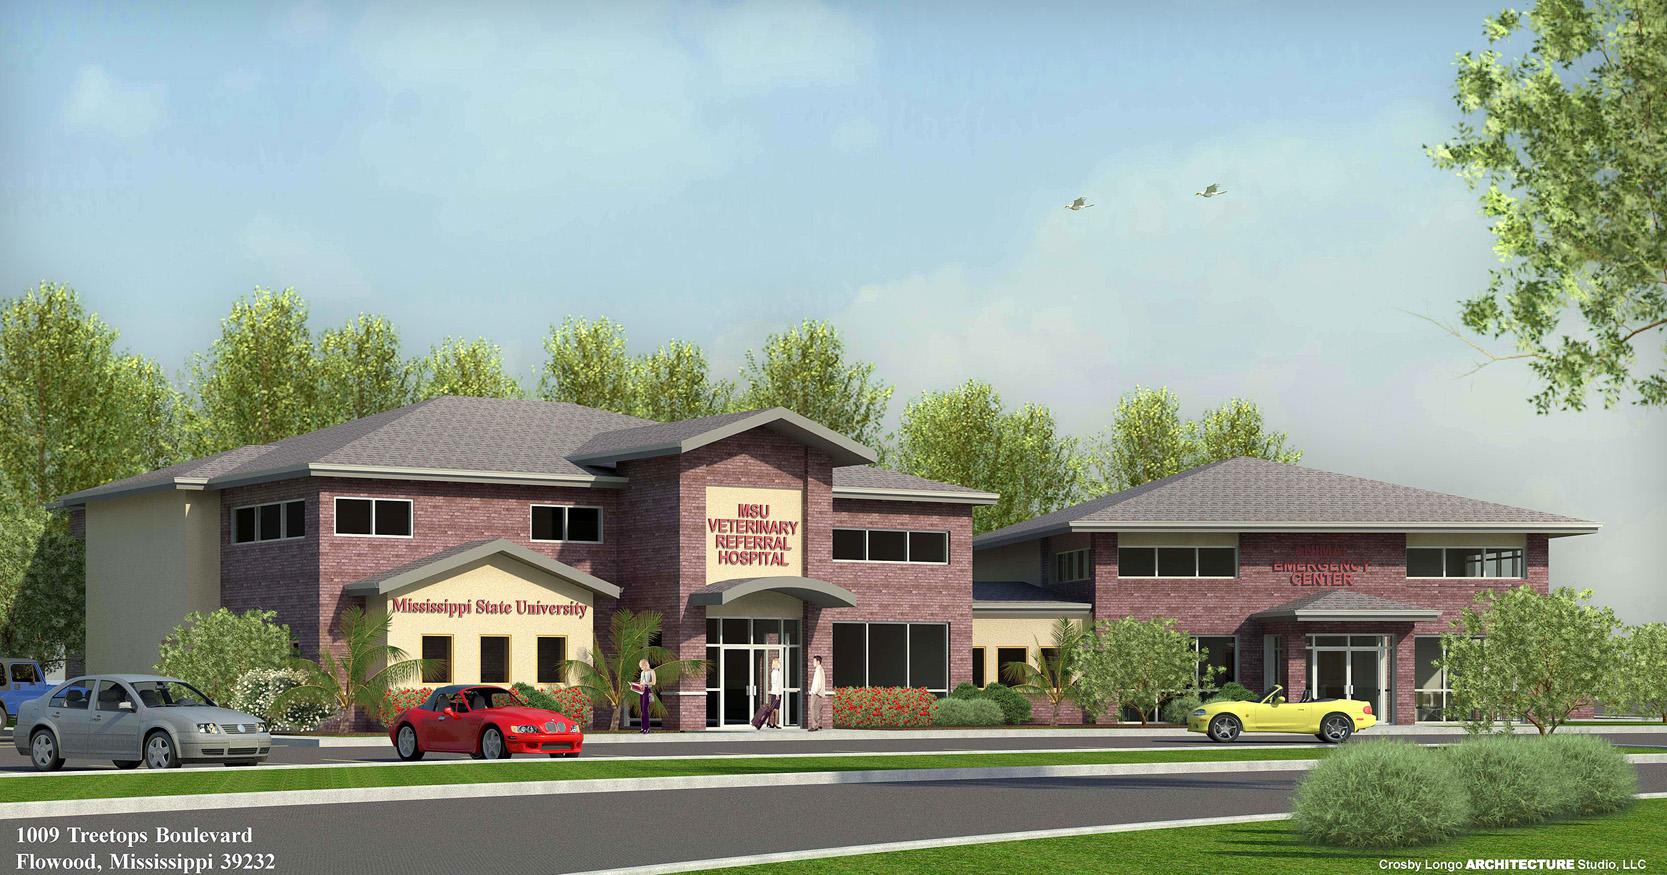 This architectural drawing represents the future veterinary complex in Flowood that will house the Animal Emergency Clinic and the College of Veterinary Medicine Referral Services Clinic. (Drawing by Crosby Longo Architecture Studio of Lafayette/New Orleans, La.)